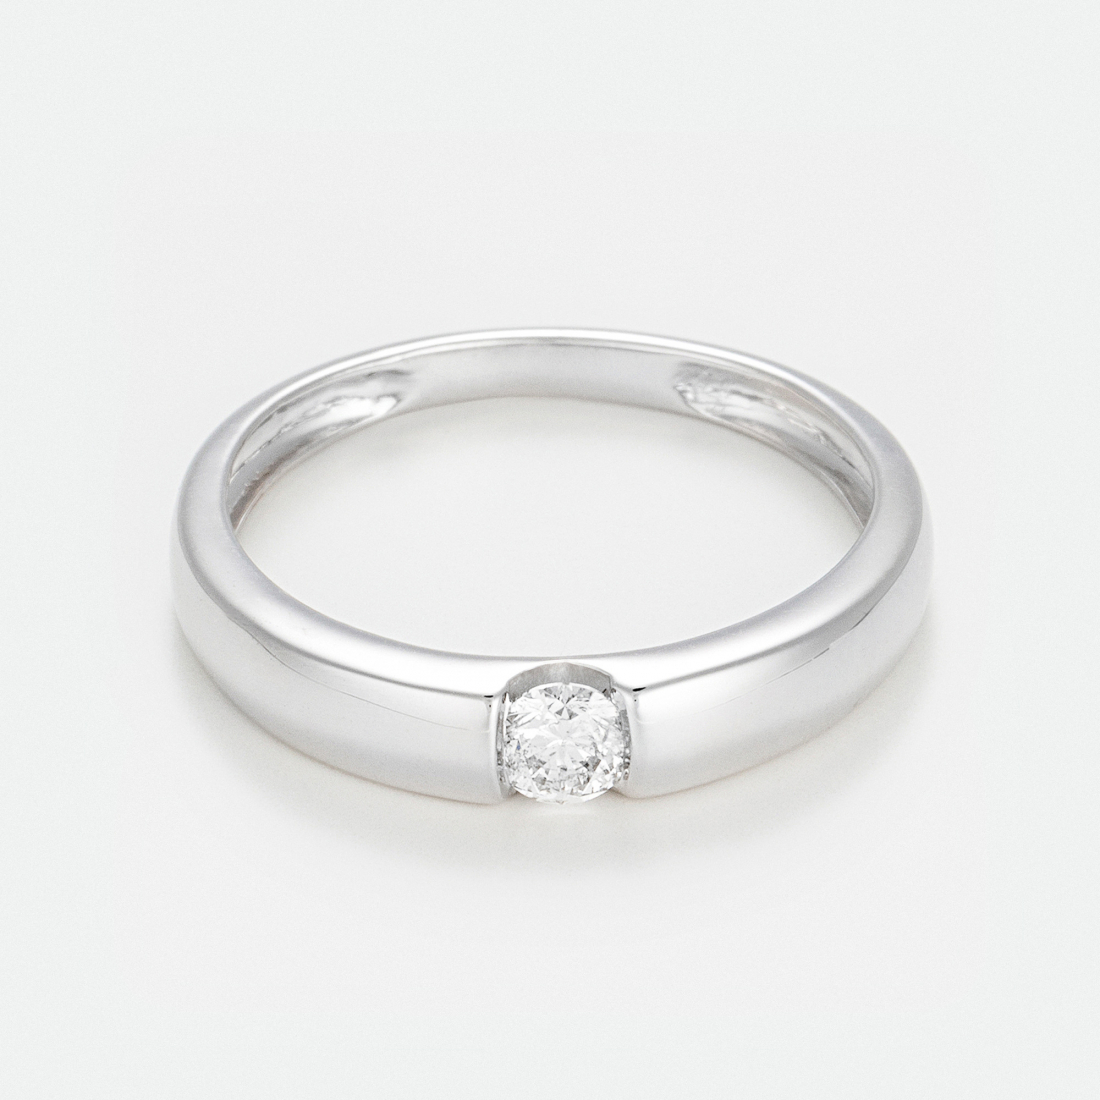 Women's 'Solitaire Calabria' Ring